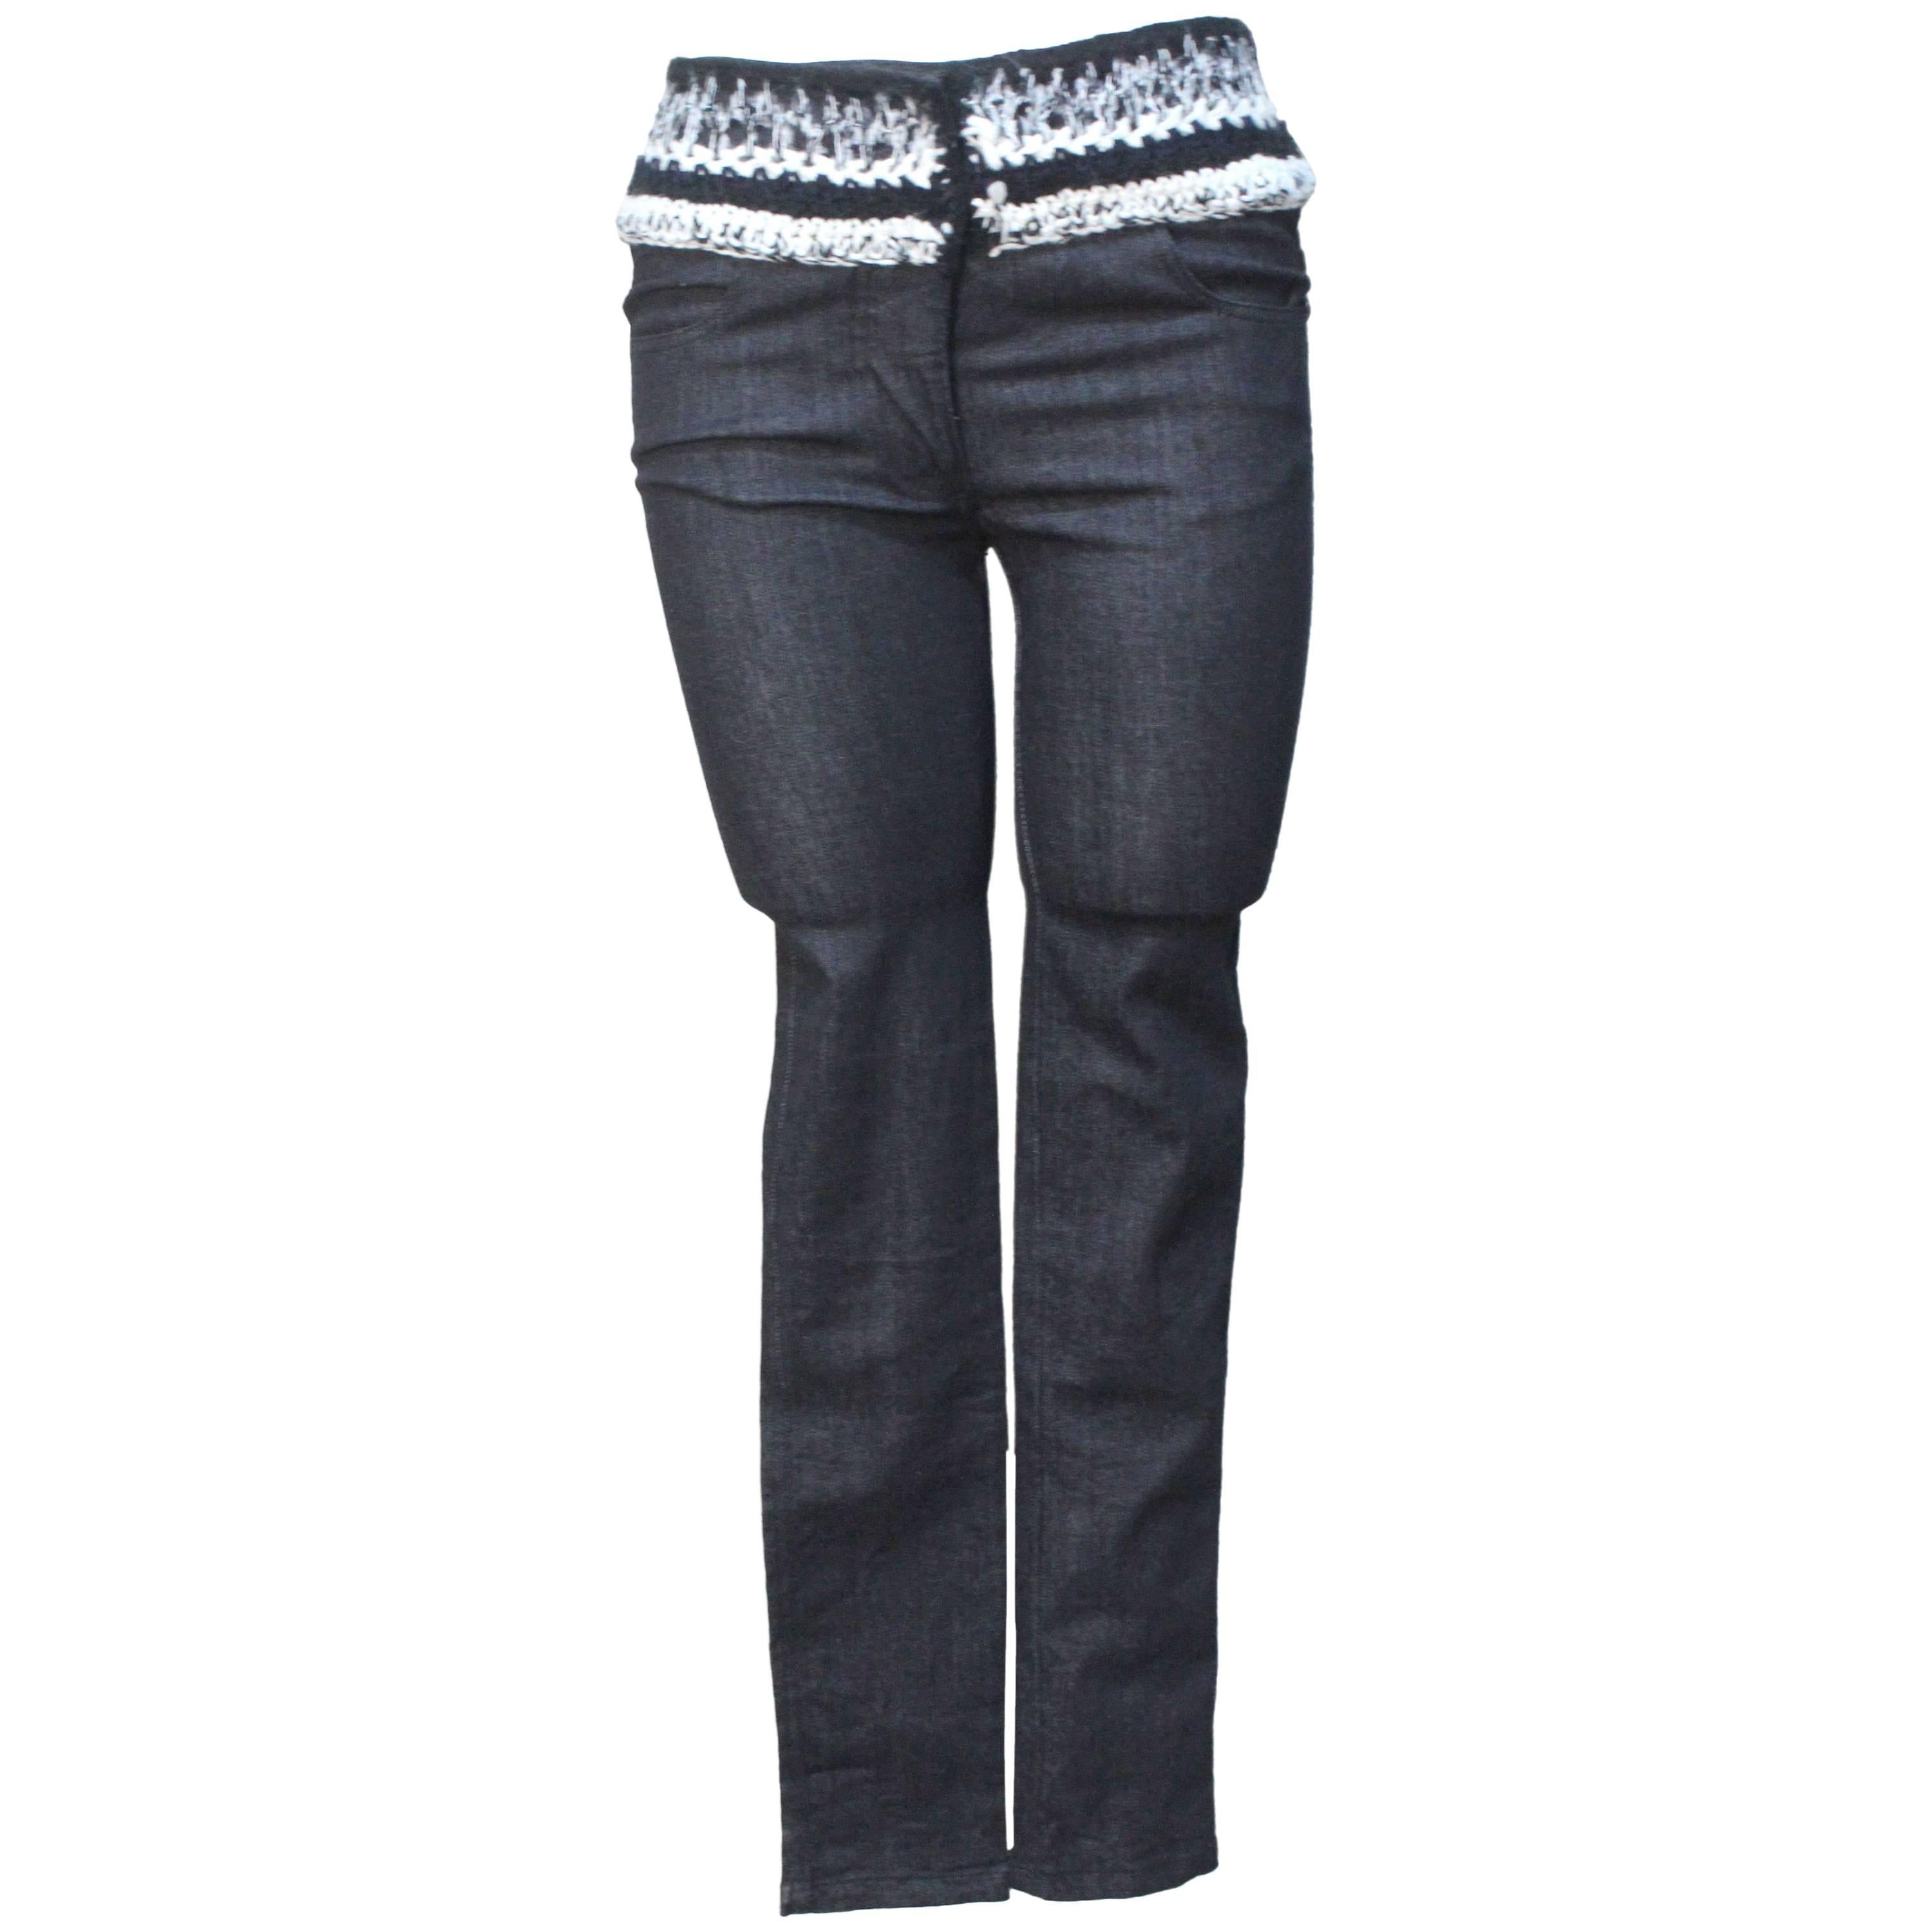 Chanel Denim Jean with Cashmere Knit Waist For Sale